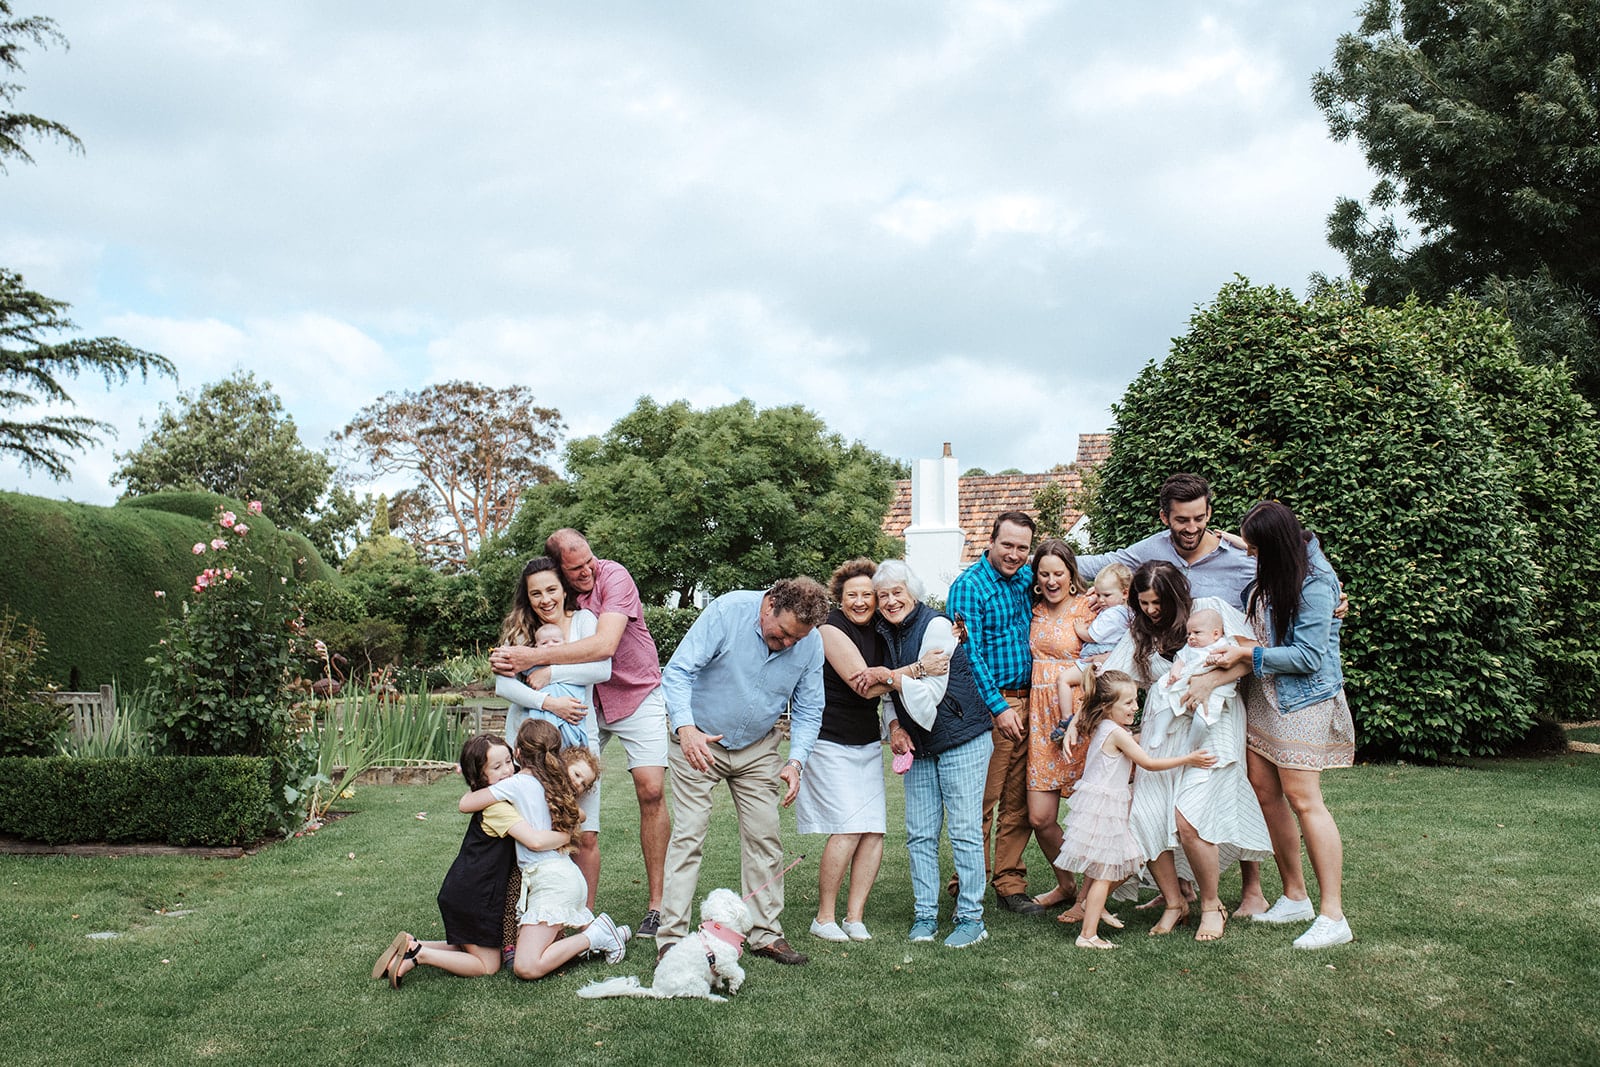 An informal extended family photo with lots of hugging on a green grassy lawn.